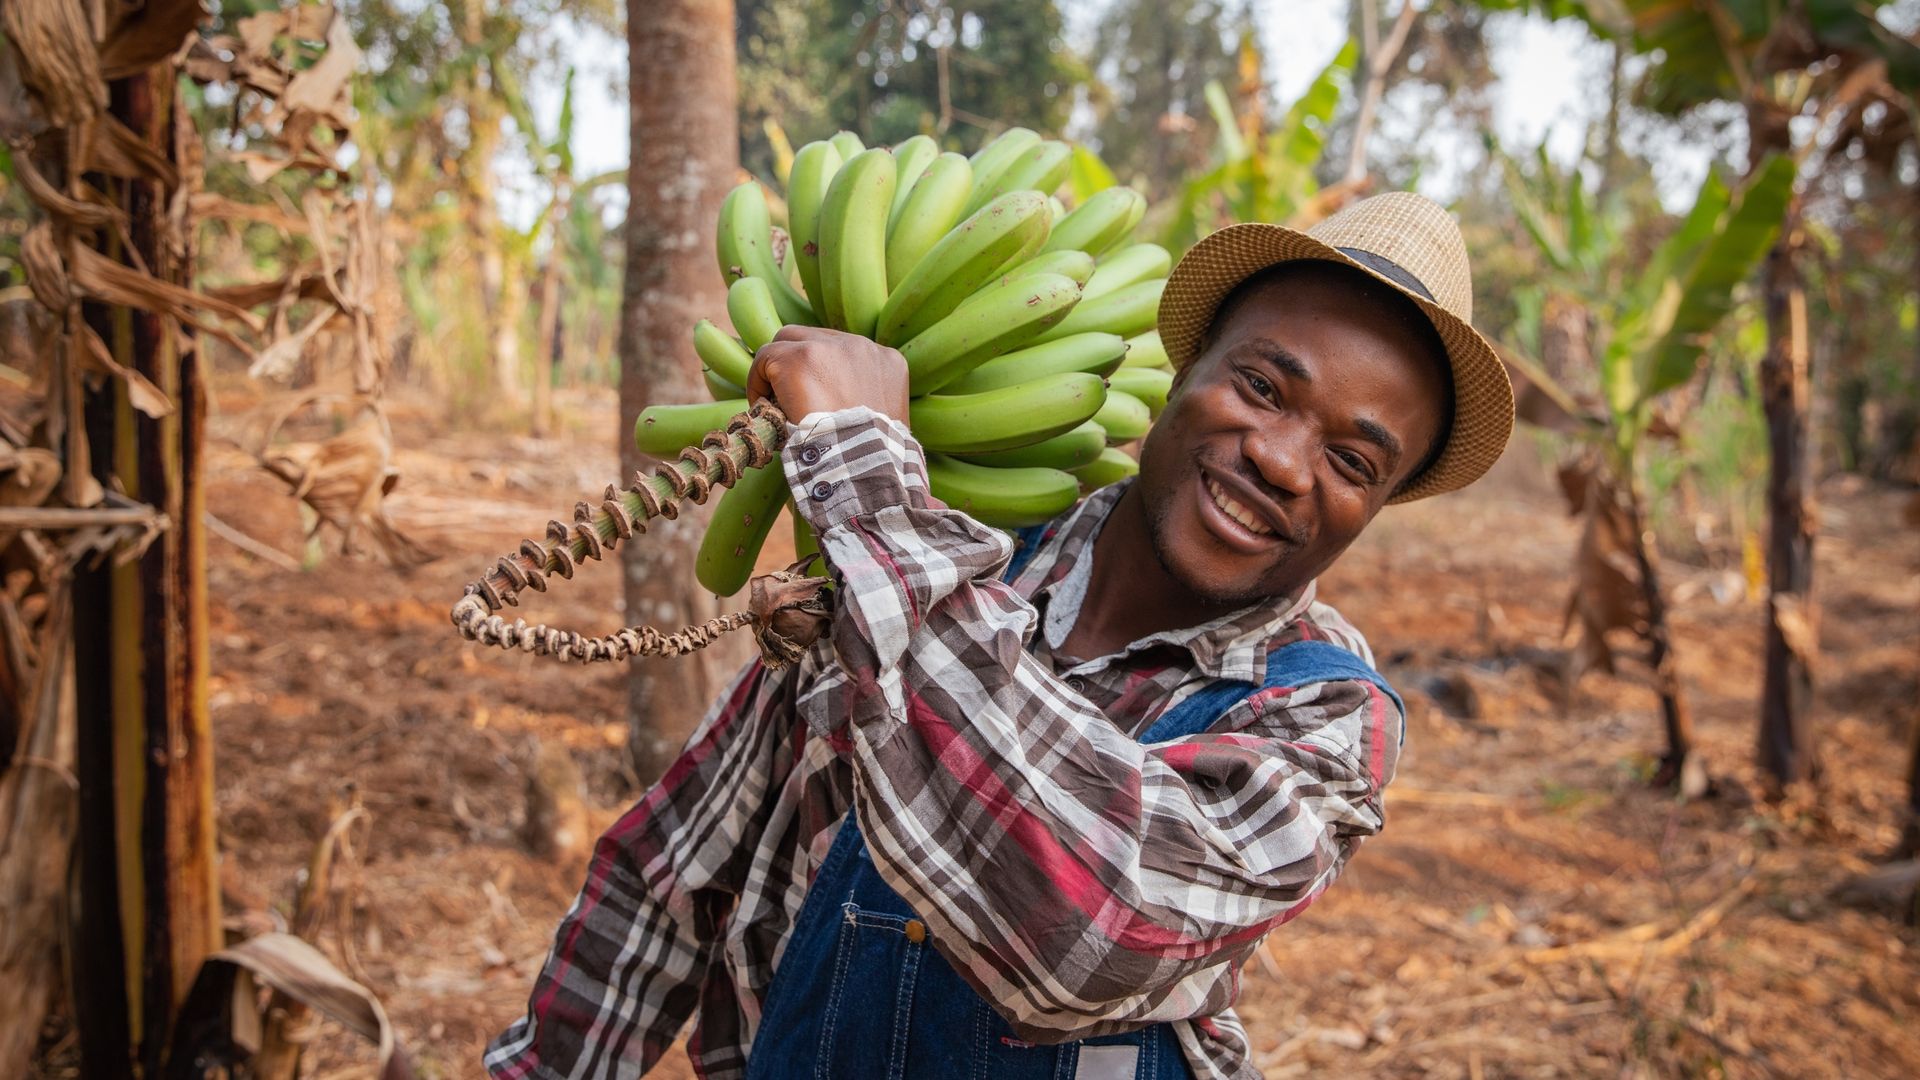 Image of a farm worker harvesting bananas